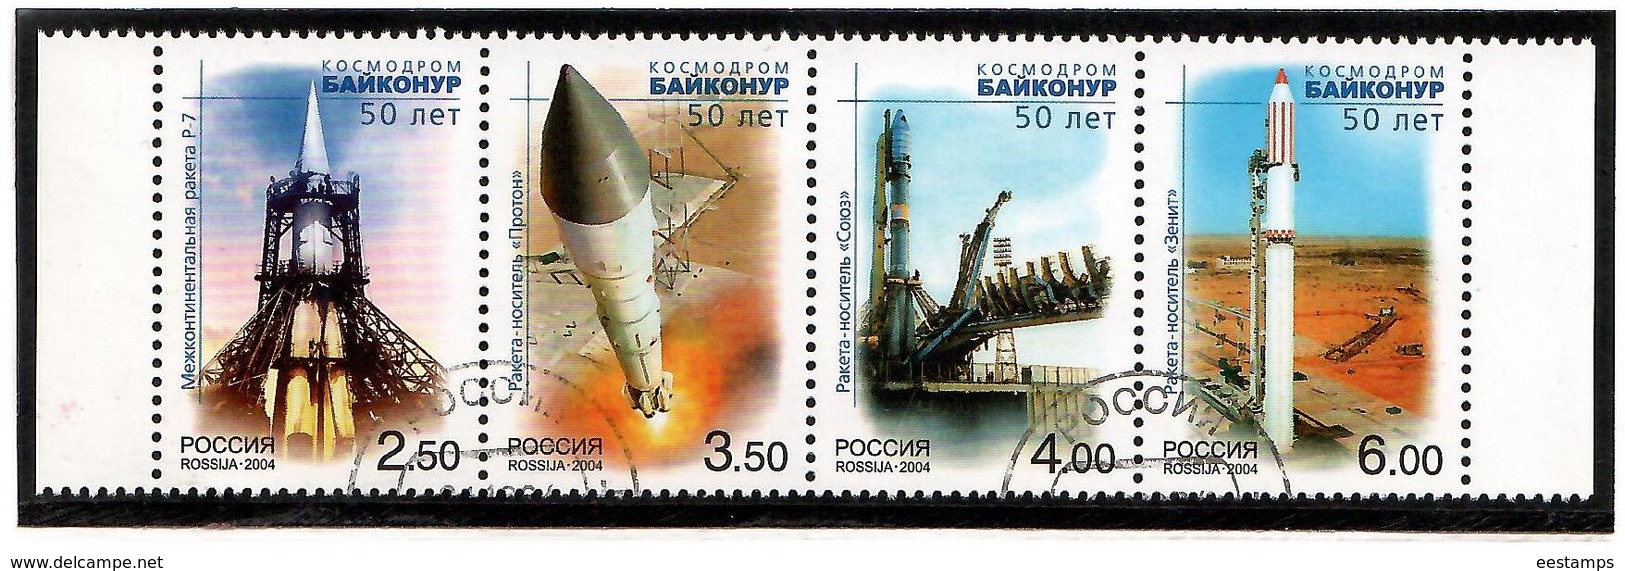 Russia 2004 . Baikonur Cosmodrome. 4v.  Michel # 1220-23  (oo) - Used Stamps